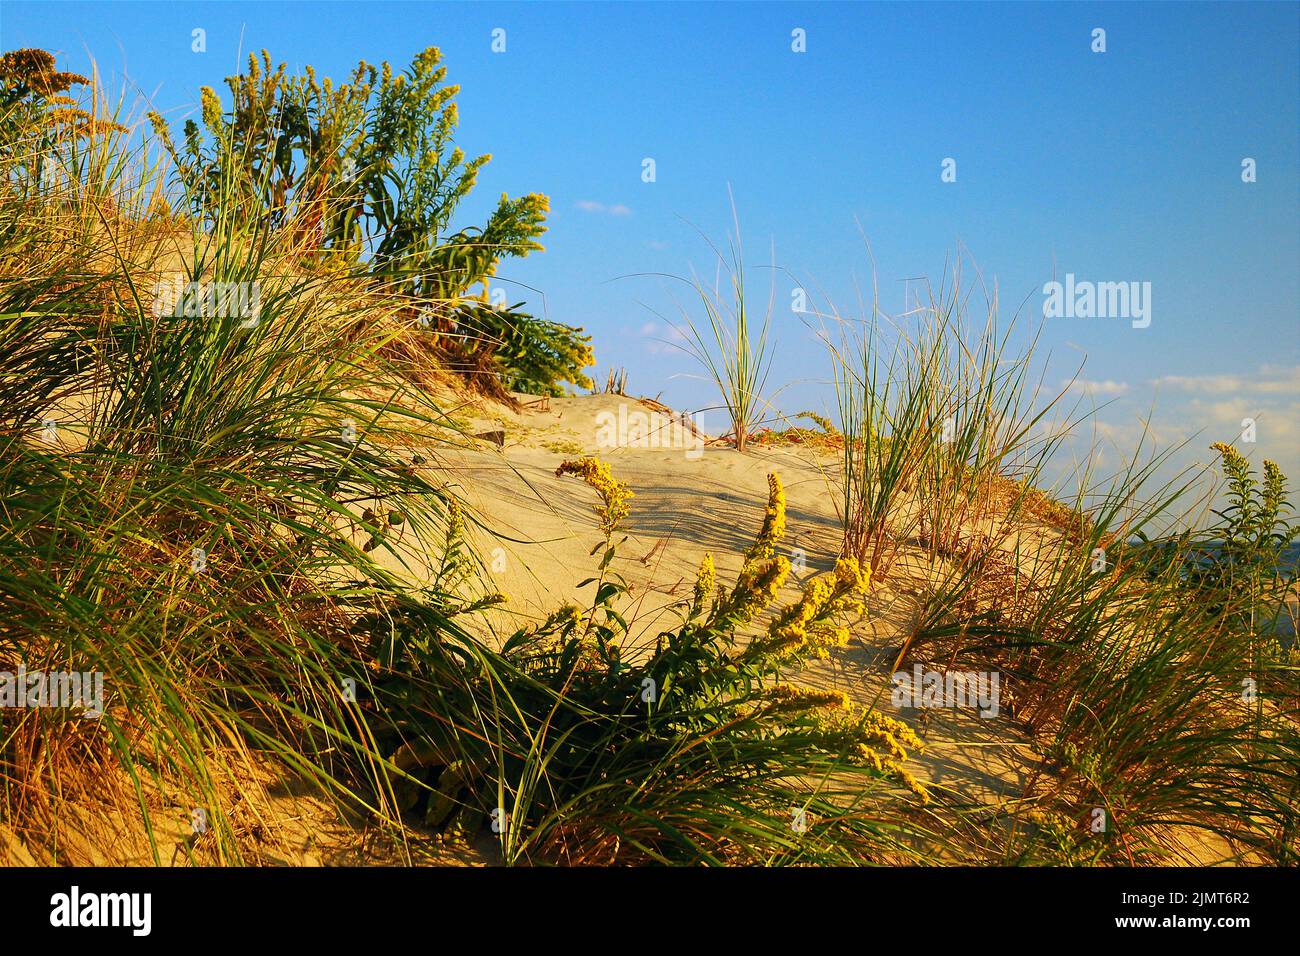 Goldenrod blooms in a sandy beach along the Jersey Shore in early autumn Stock Photo